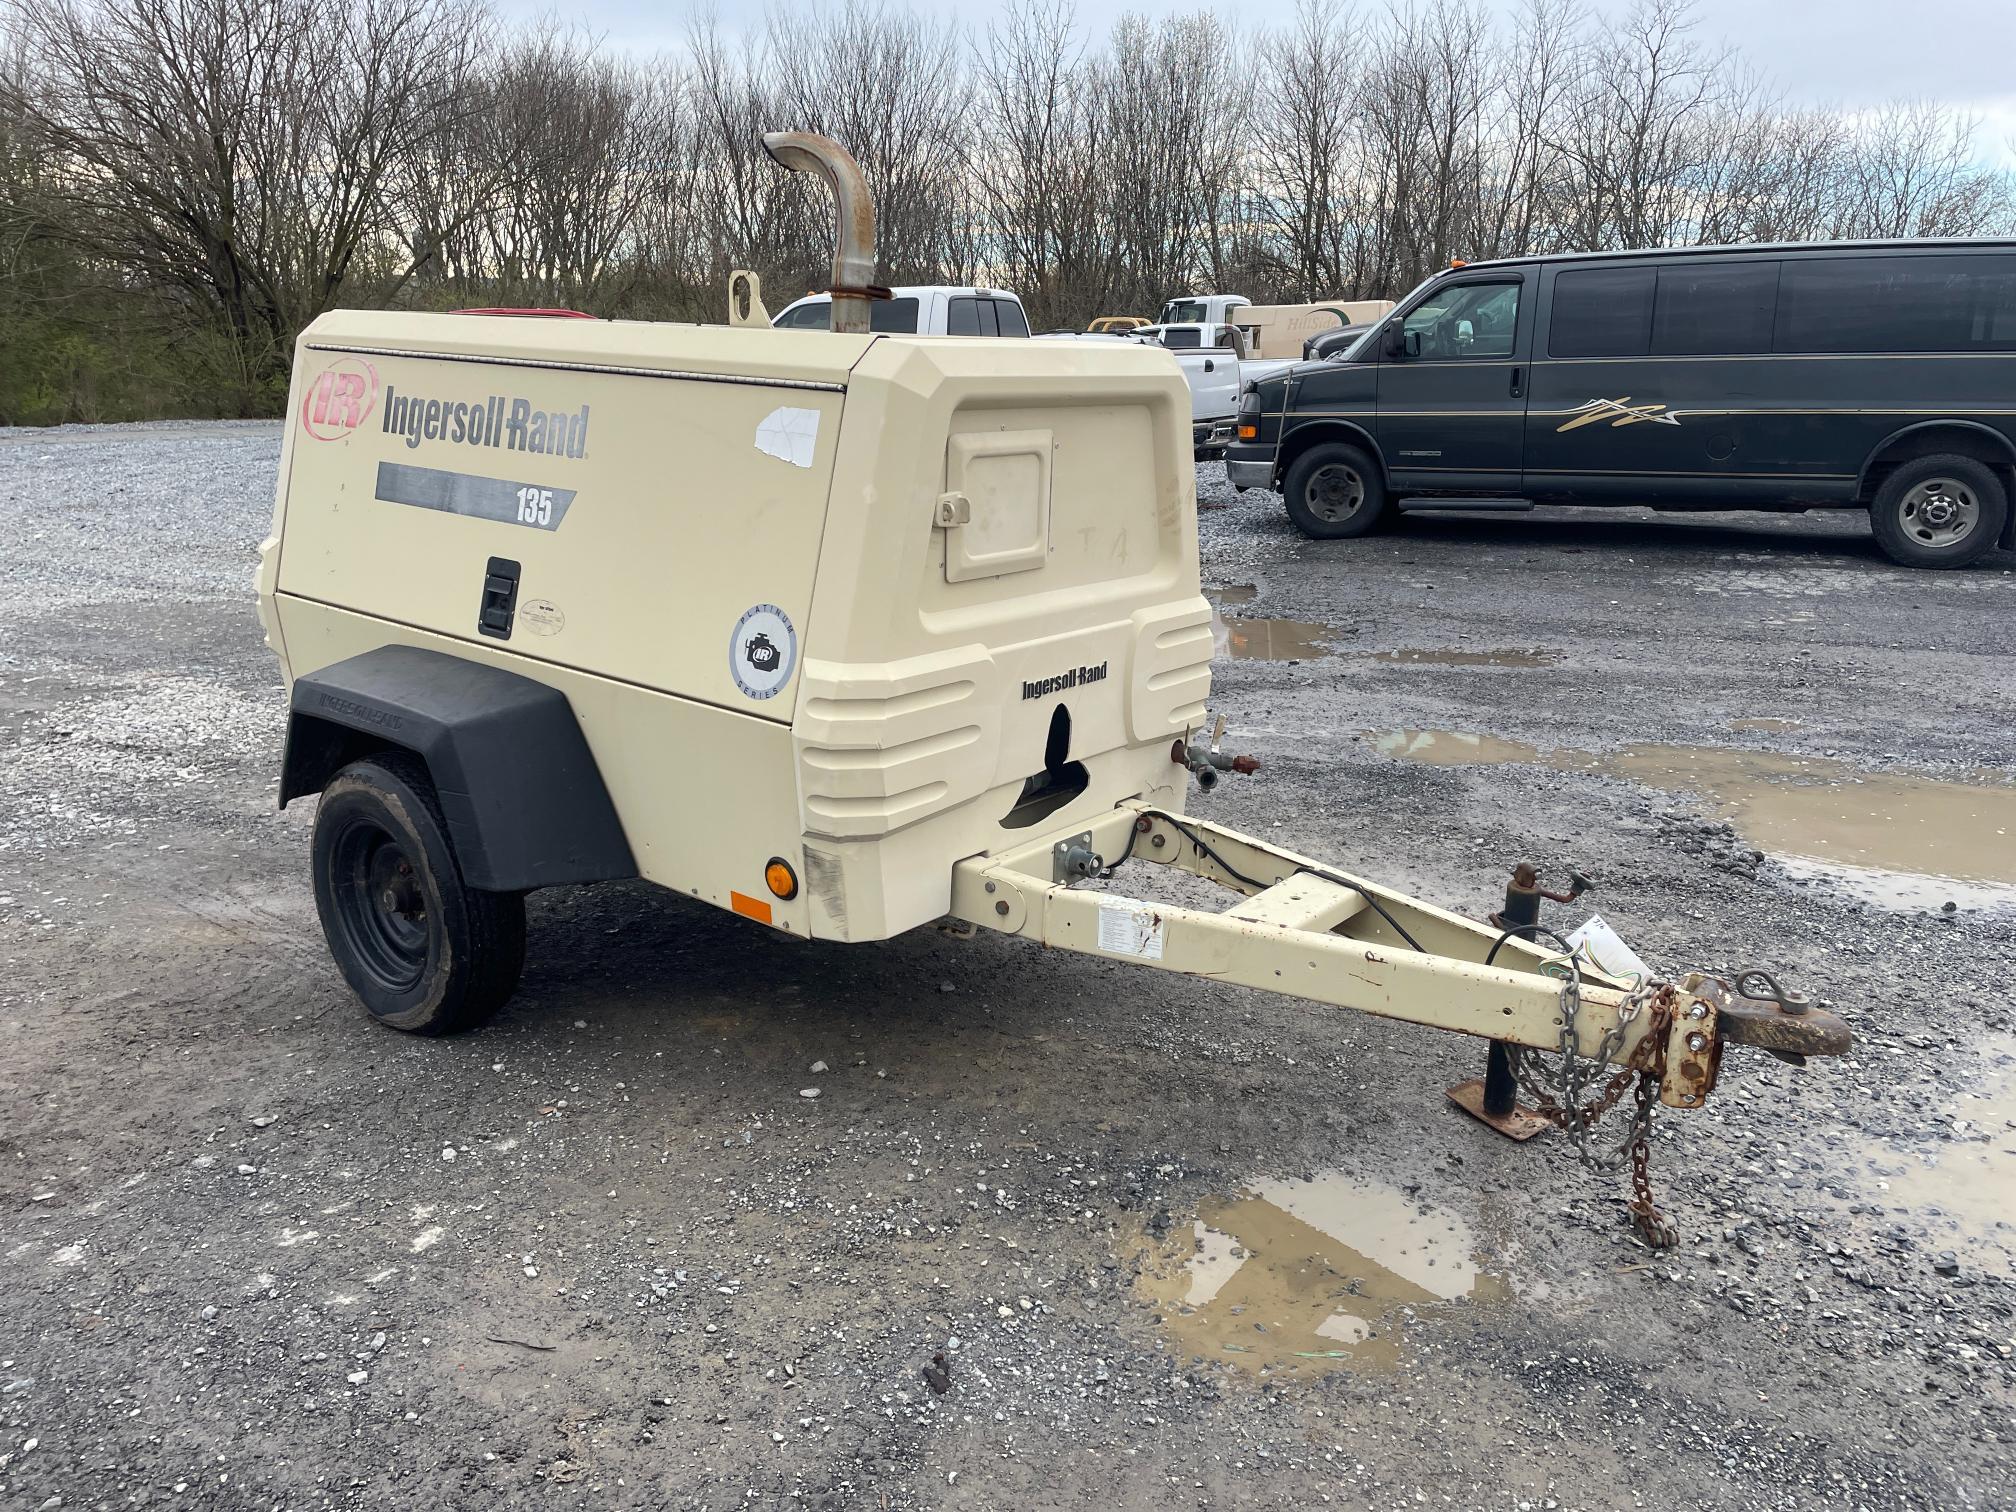 1996 Ingersoll Rand 135 Towable Air Compressor